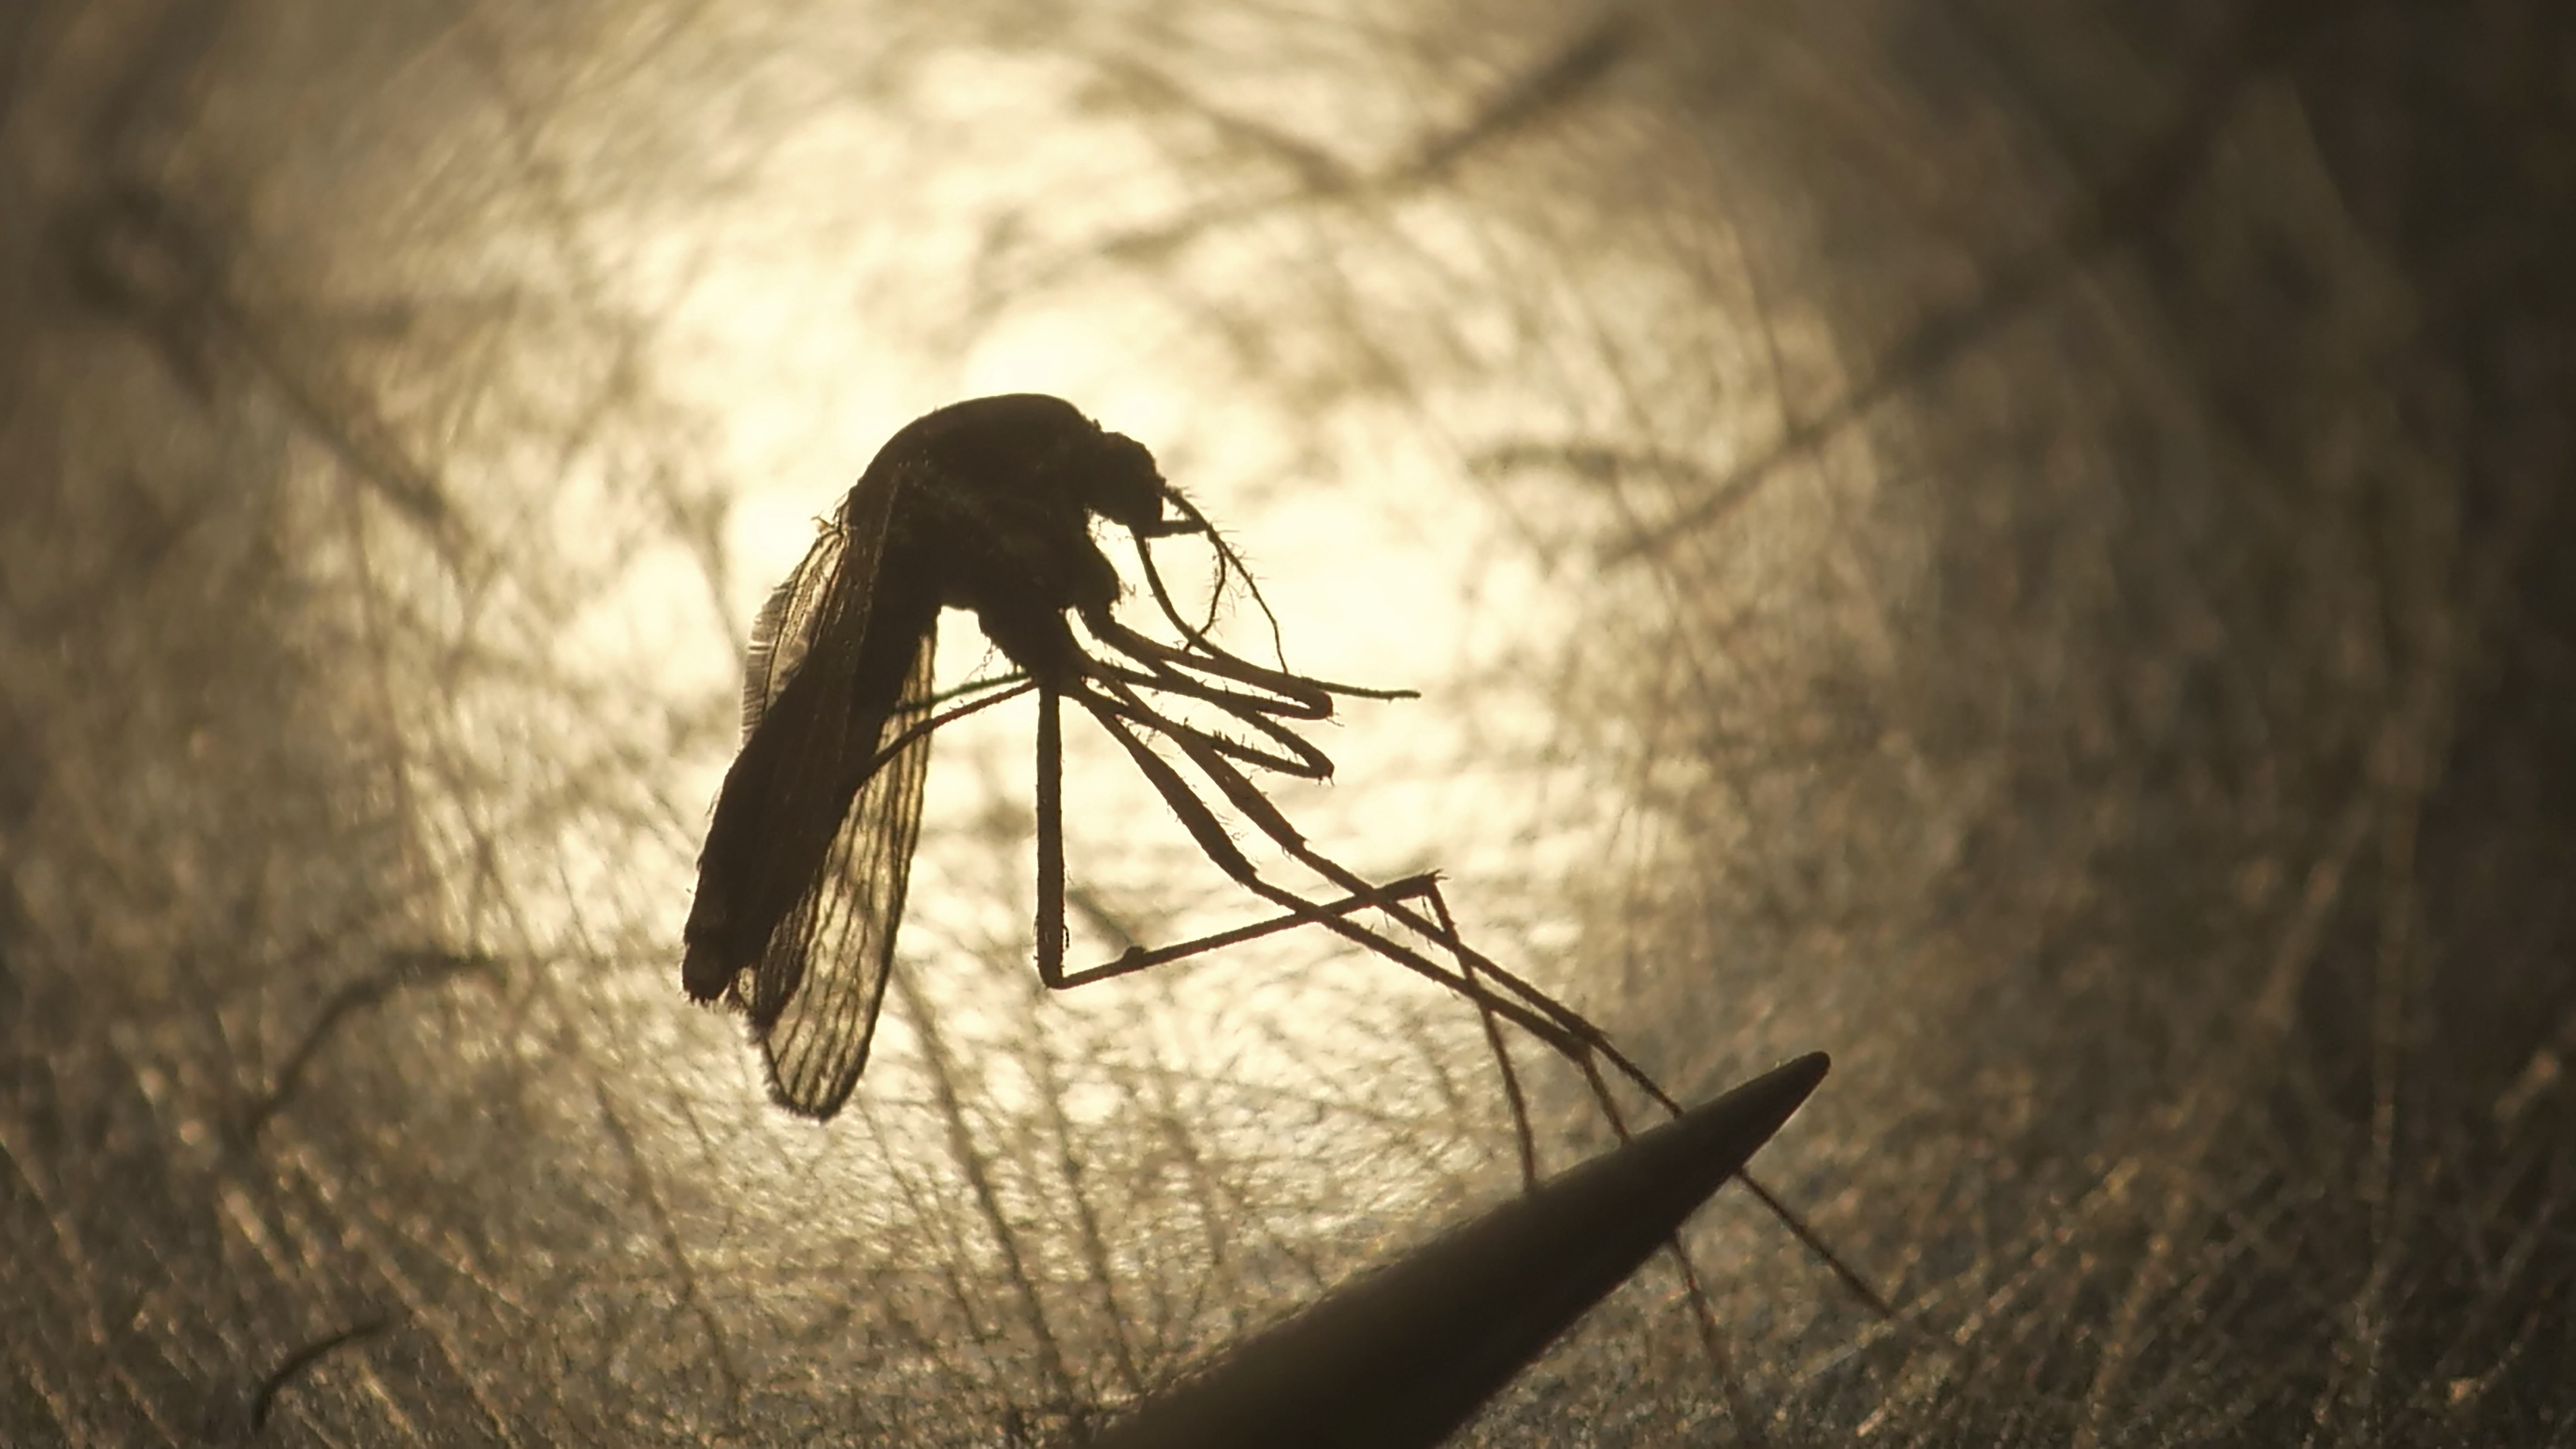 Warmer weather affects mosquito breeding, which may lead to an increase in some deadly diseases.